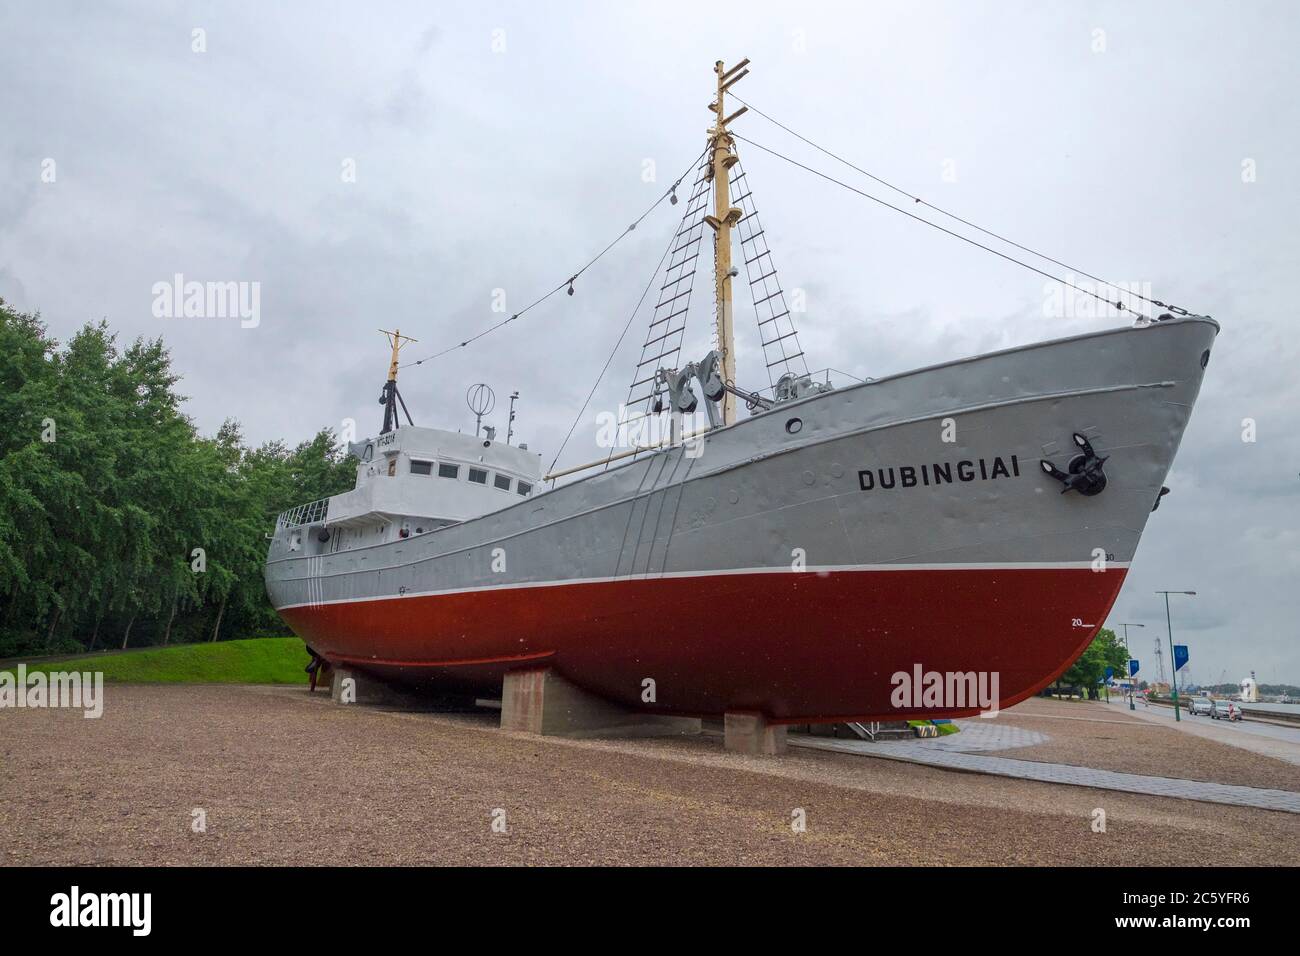 The steel-hulled Soviet fishing boat, Dubingiai. At the Ethnographic Homestead Complex in Neringa, Lithuania. Stock Photo